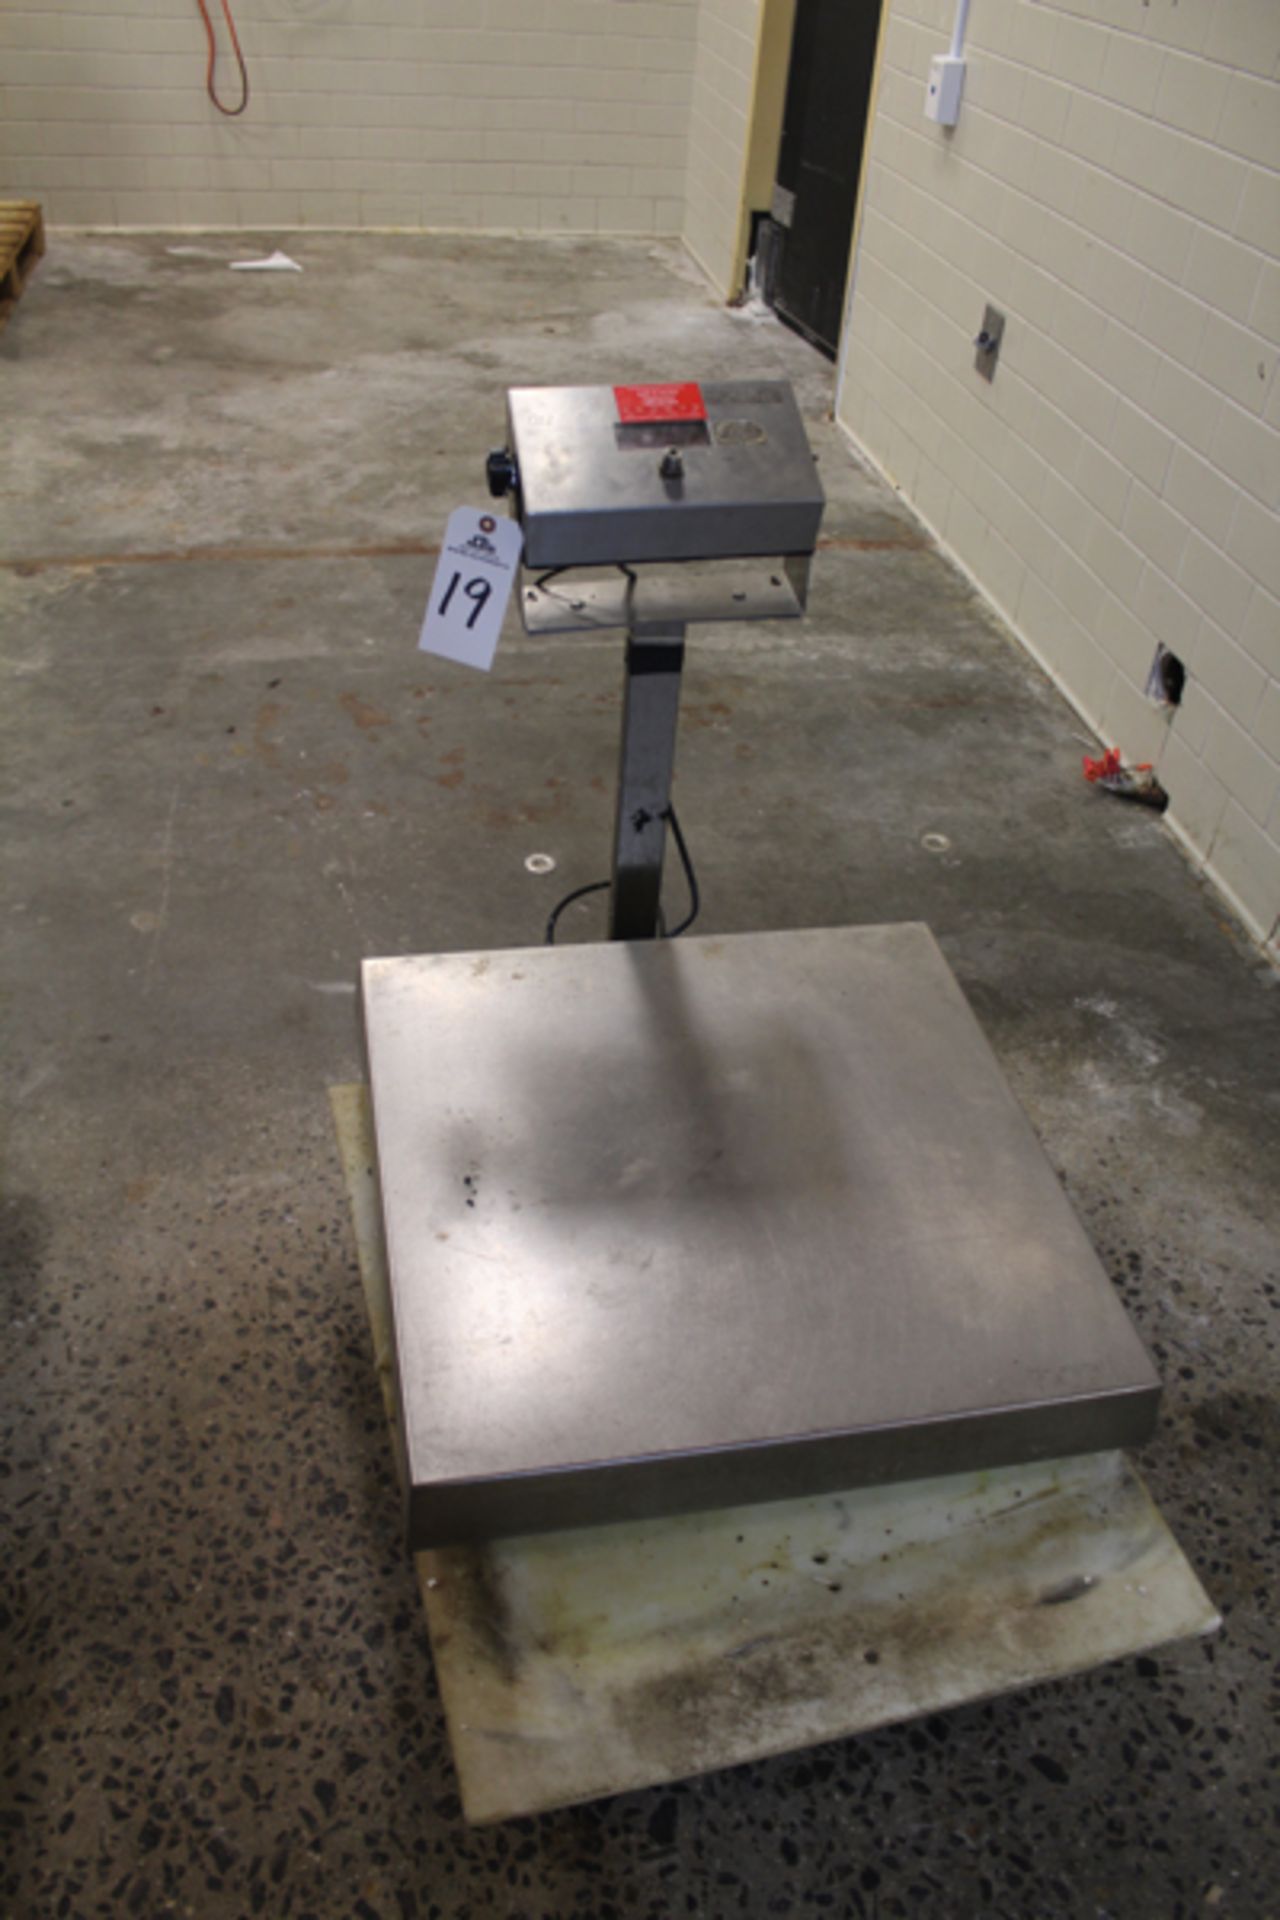 Doran Bench Scale | Rigging Price: $10 or May Hand Carry